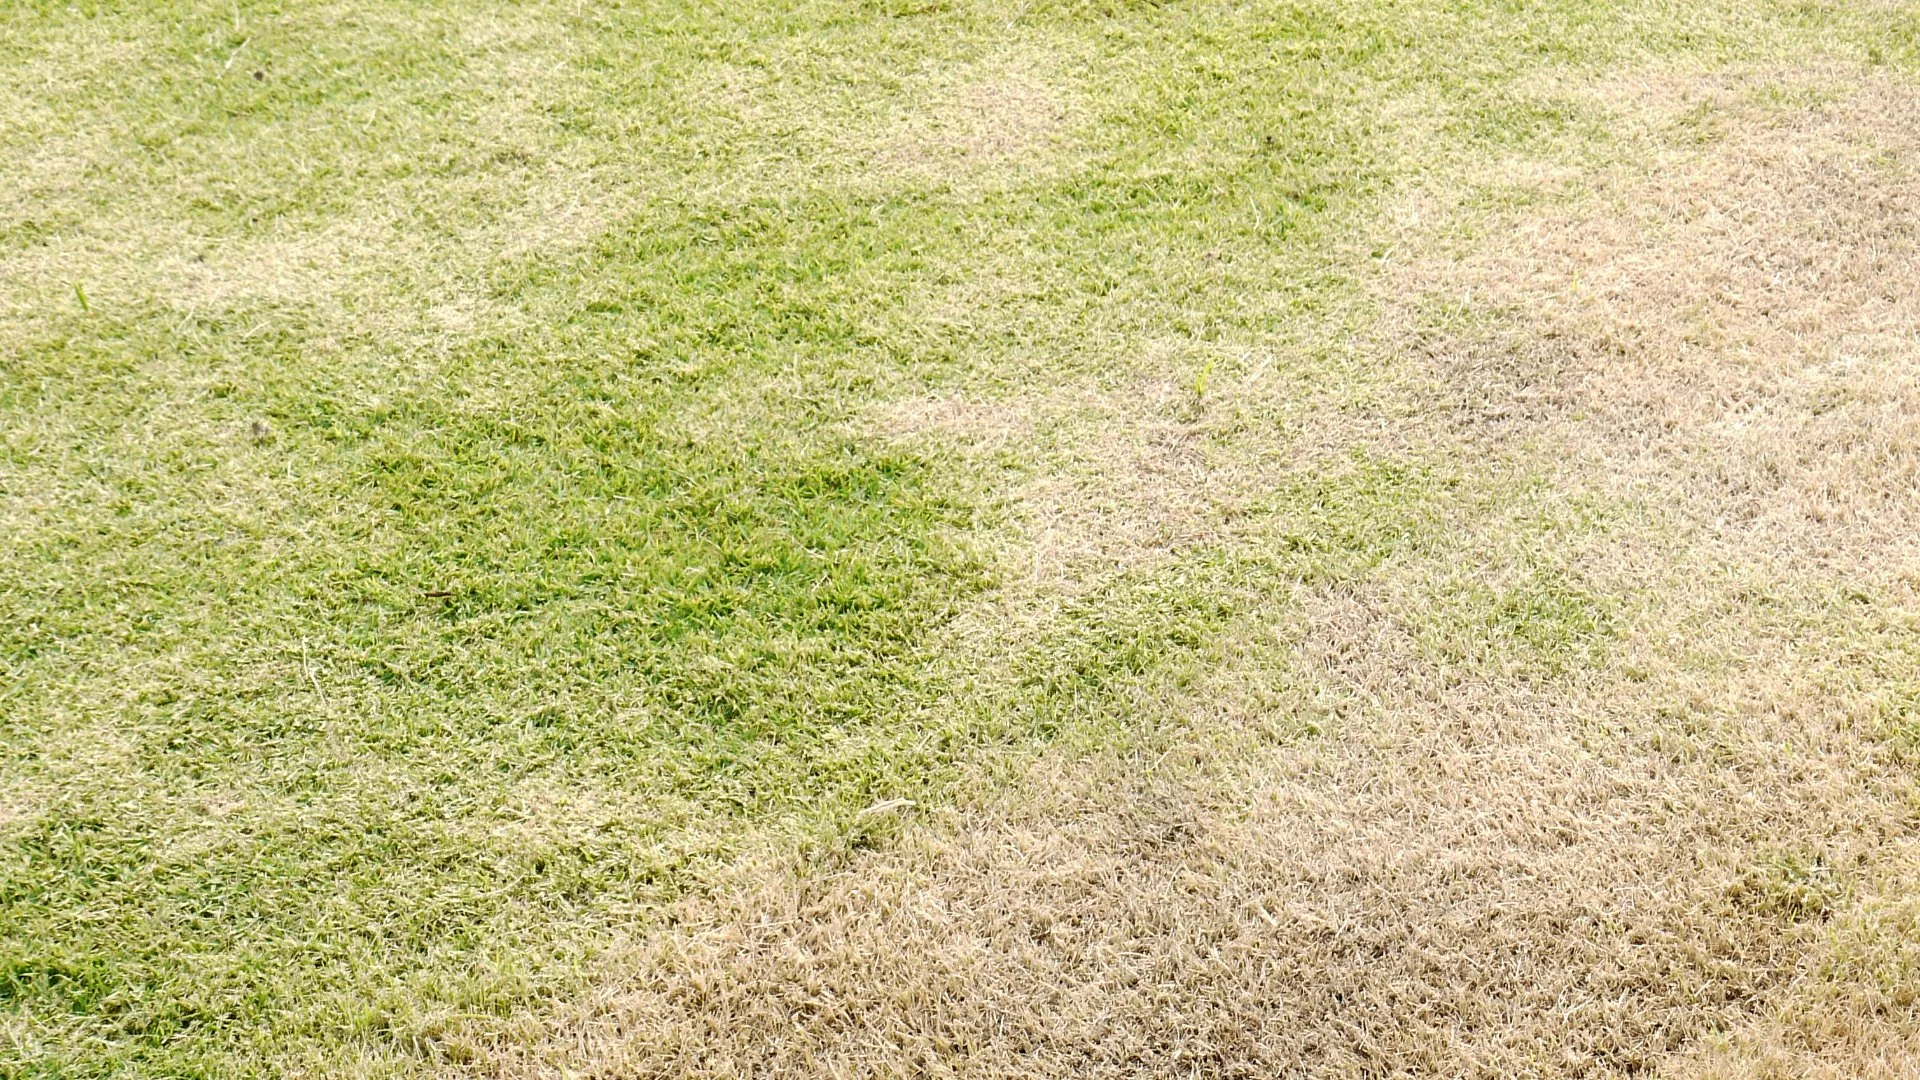 What Are the Symptoms of Bermudagrass Mites?